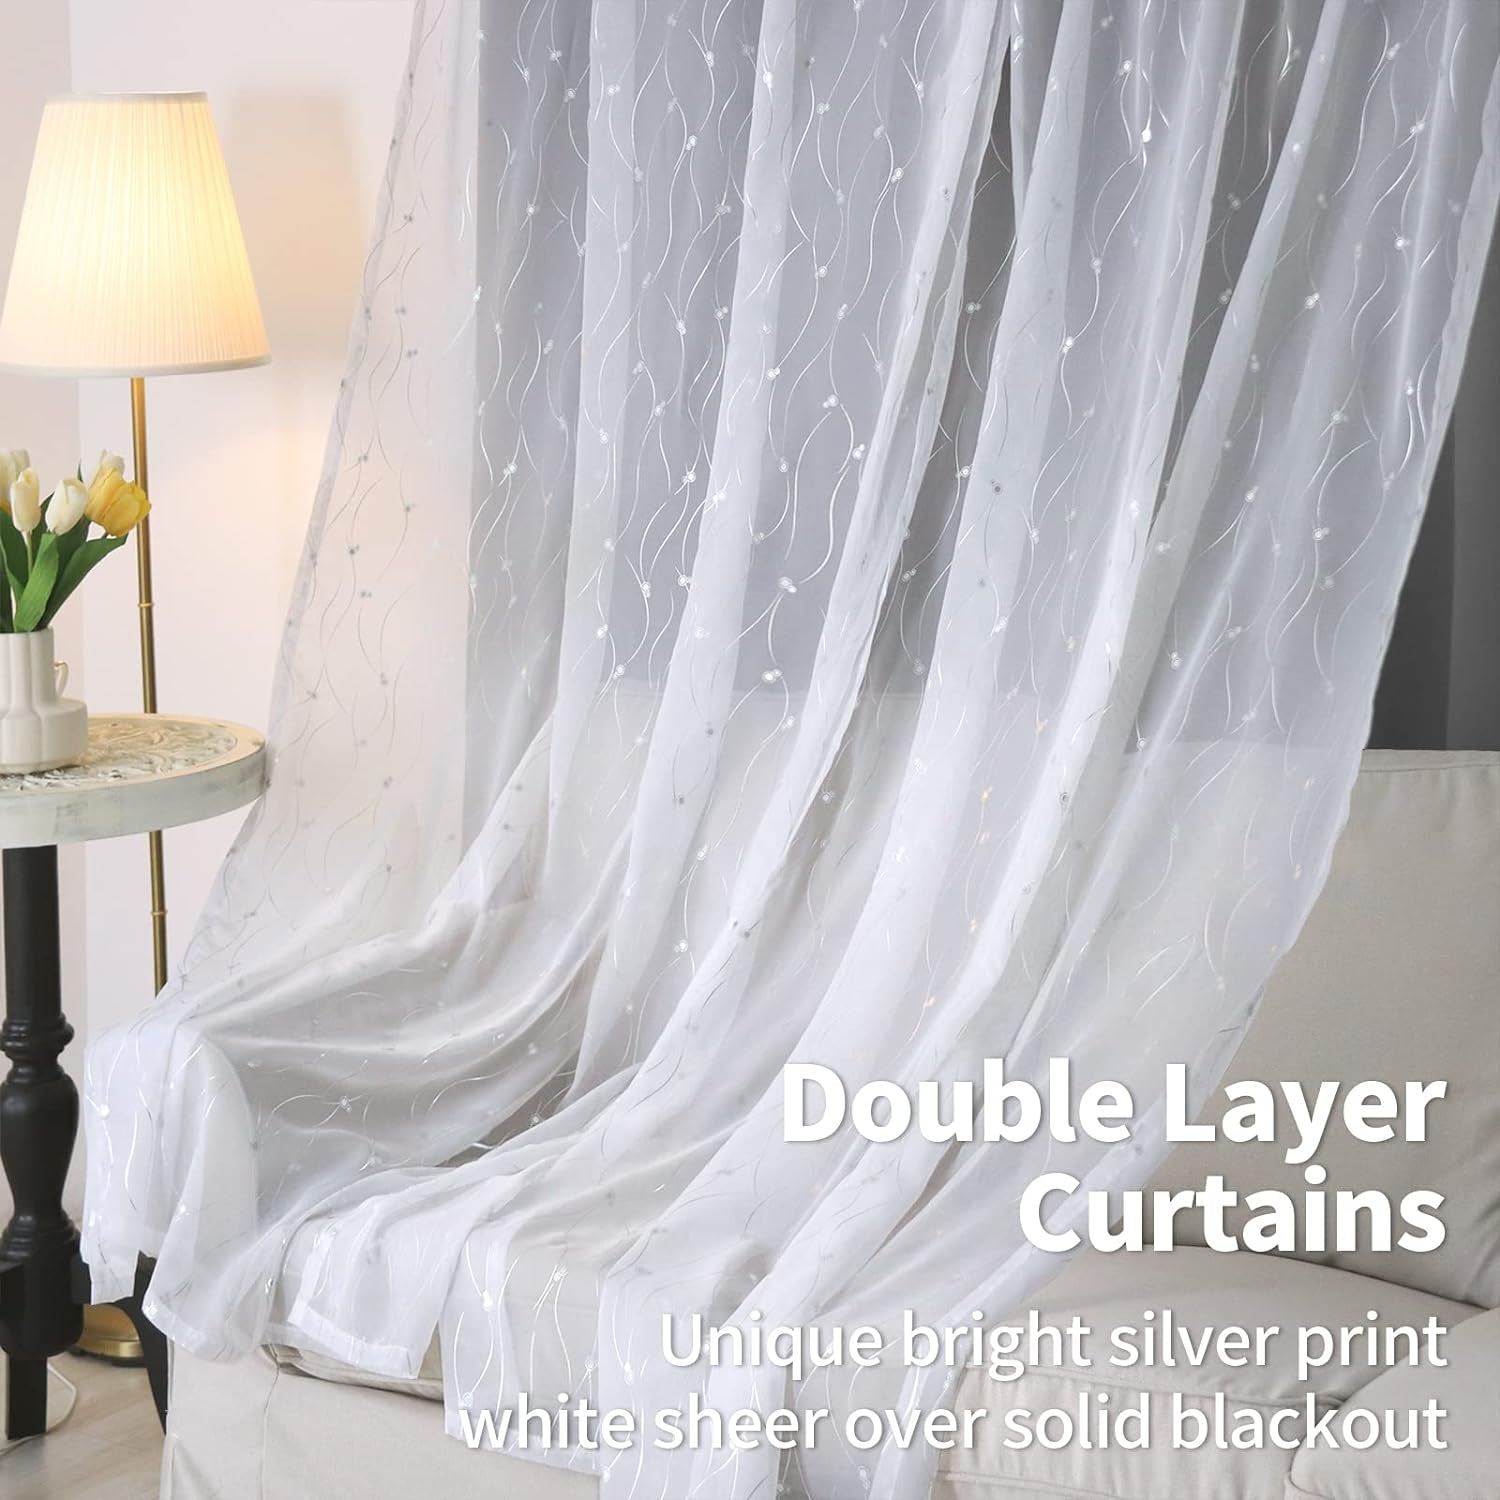 Bgment Grey Blackout Curtains with Sheer Overlay 84 Inches Long，Double Layer Silver Printed Kids Curtains Grommet Thermal Insulated Window Drapes for Living Room, 2 Panel, 52 X 84, Dark Grey  BGment   